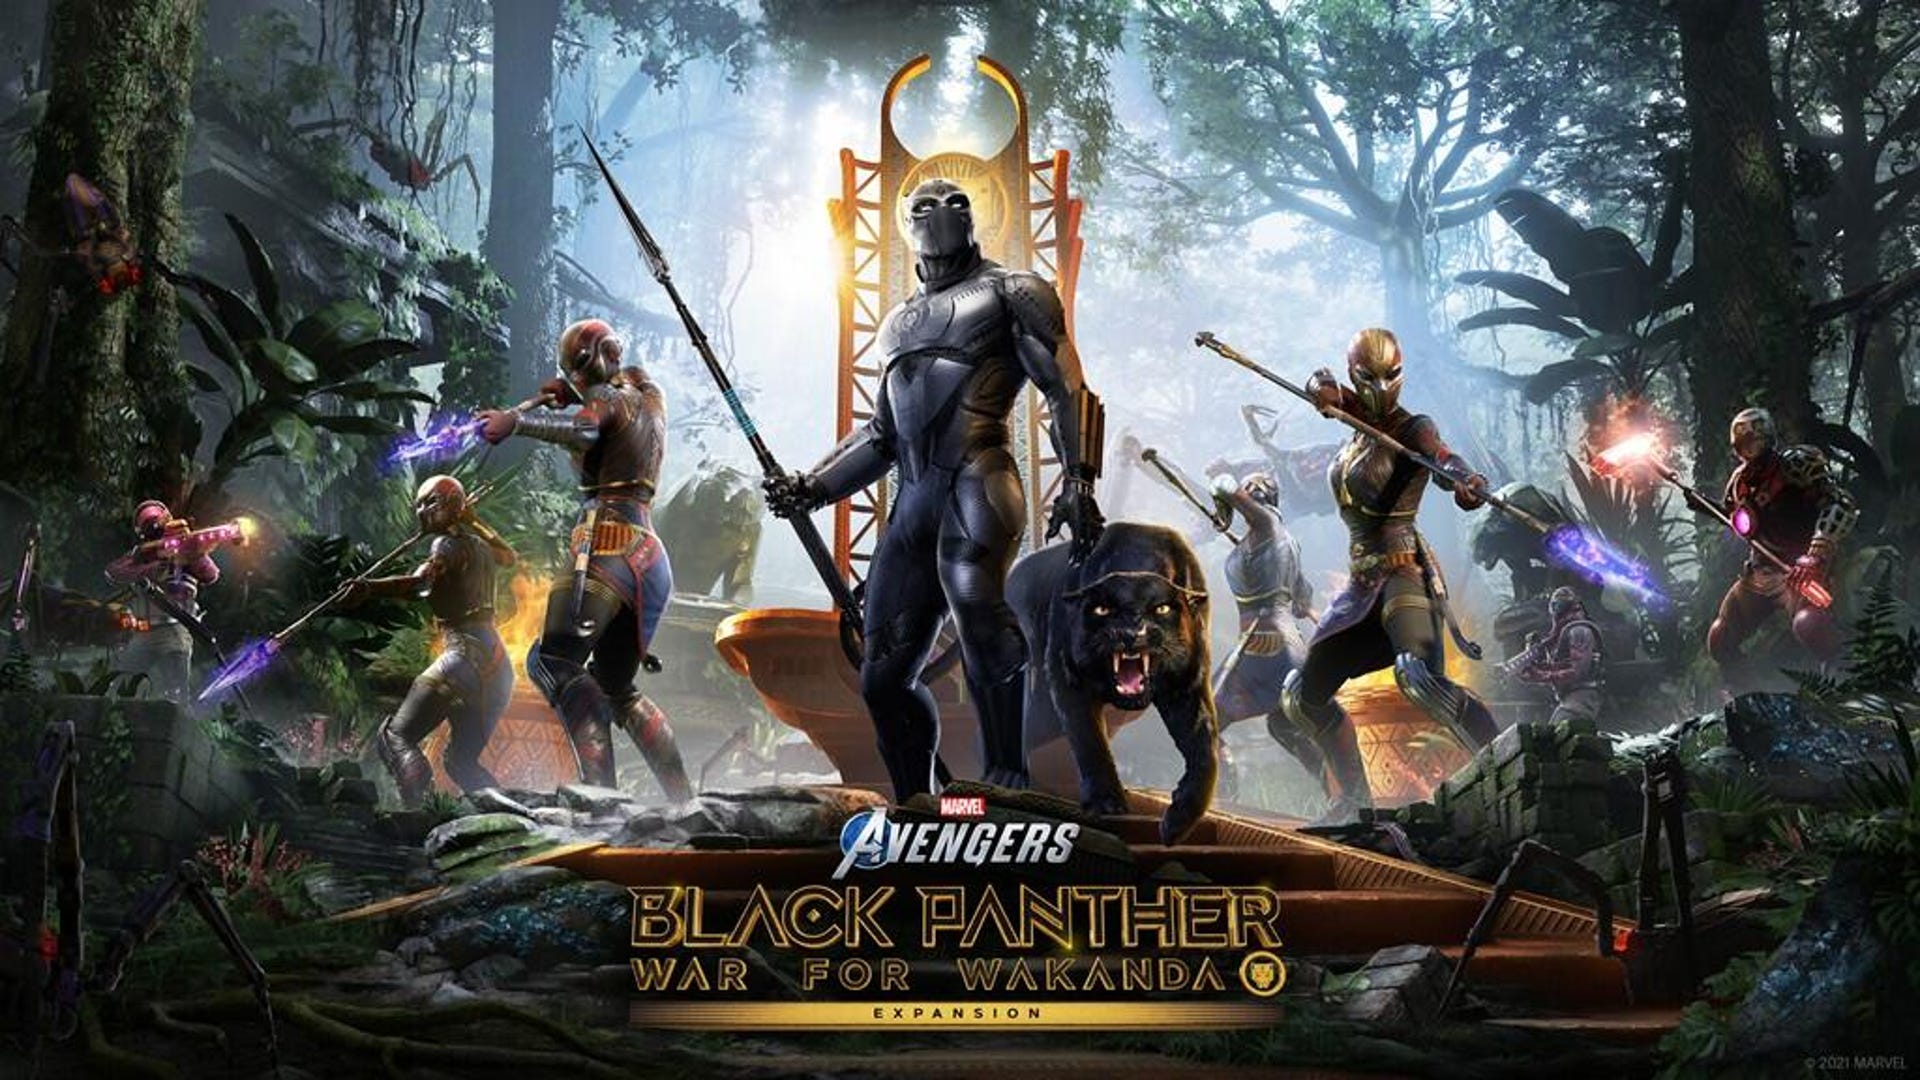 Marvel's Avengers lets you play as Black Panther in War for